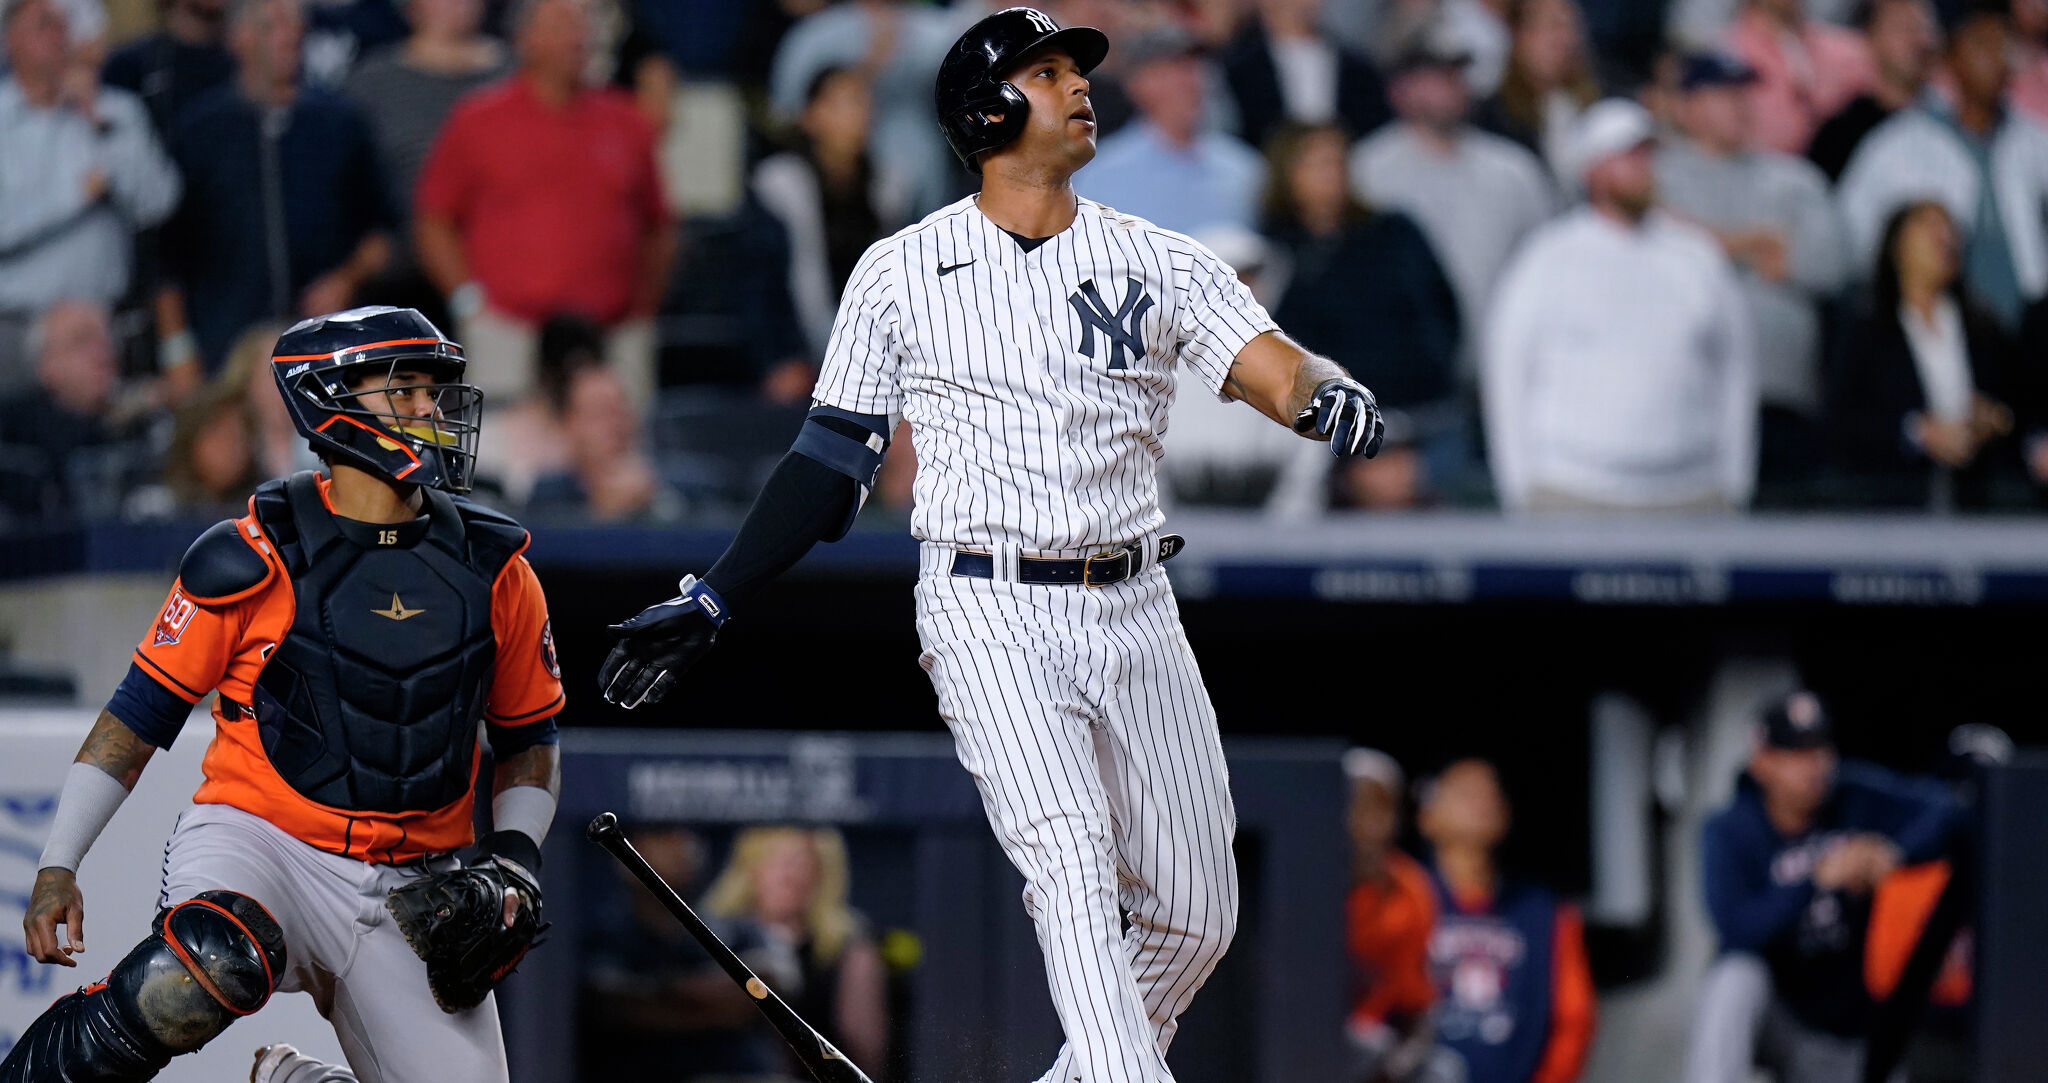 Aaron Judge Gives Yankees Walk-Off Win Over Astros - The New York Times